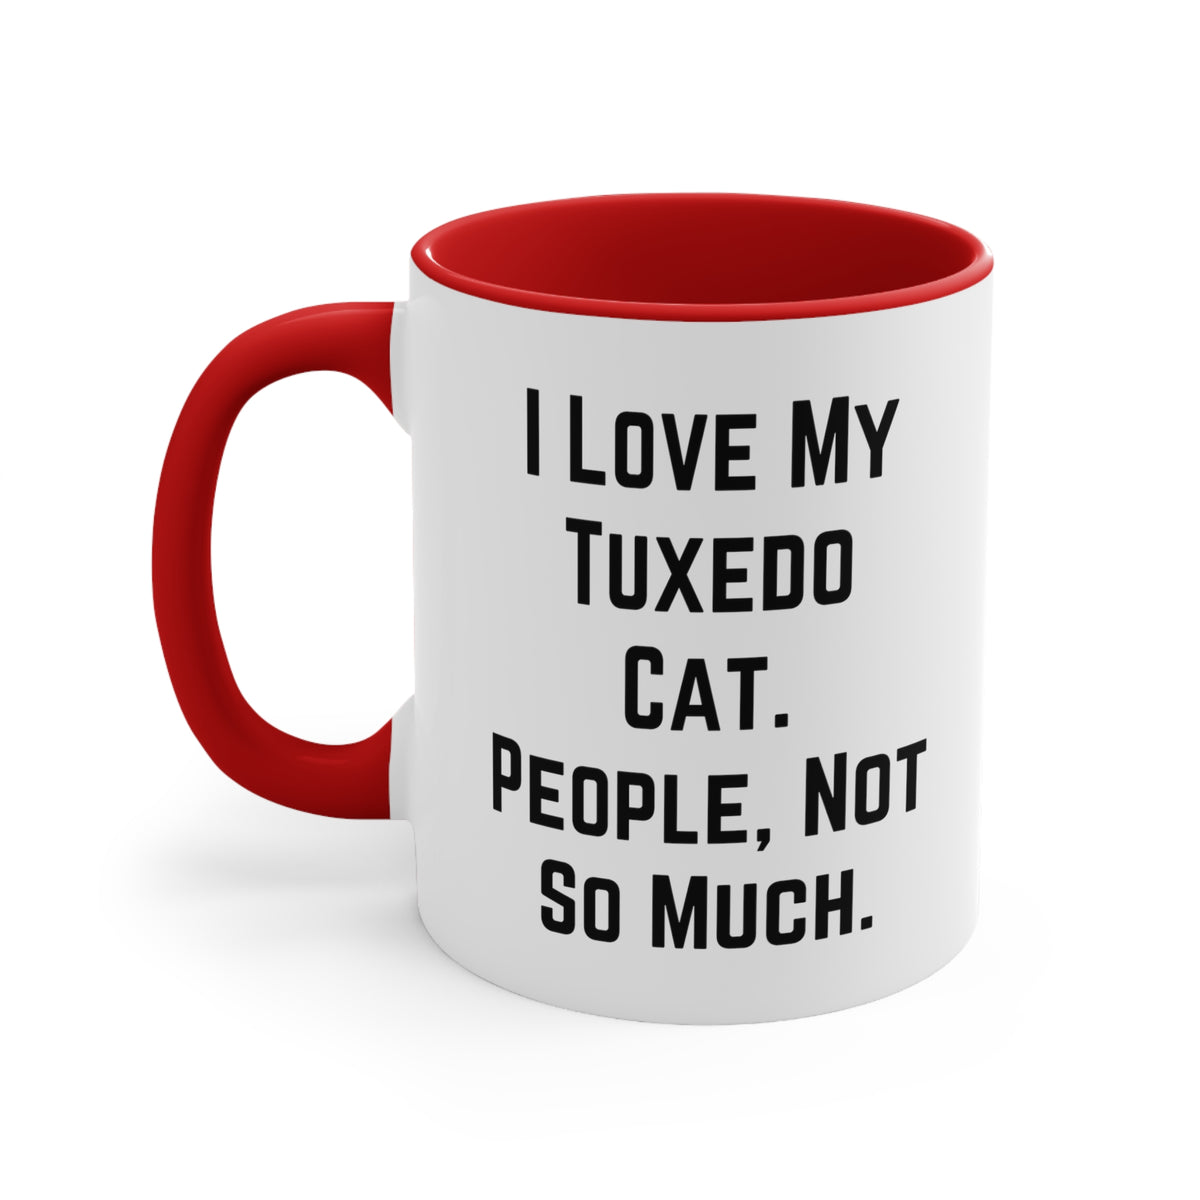 Special Tuxedo Cat Gifts, I Love My Tuxedo Cat. People, Not So Much, Cool Birthday Two Tone 11oz Mug Gifts For Cat Lovers, Unique tuxedo cat gifts, Tuxedo cat gift ideas, Personalized tuxedo cat